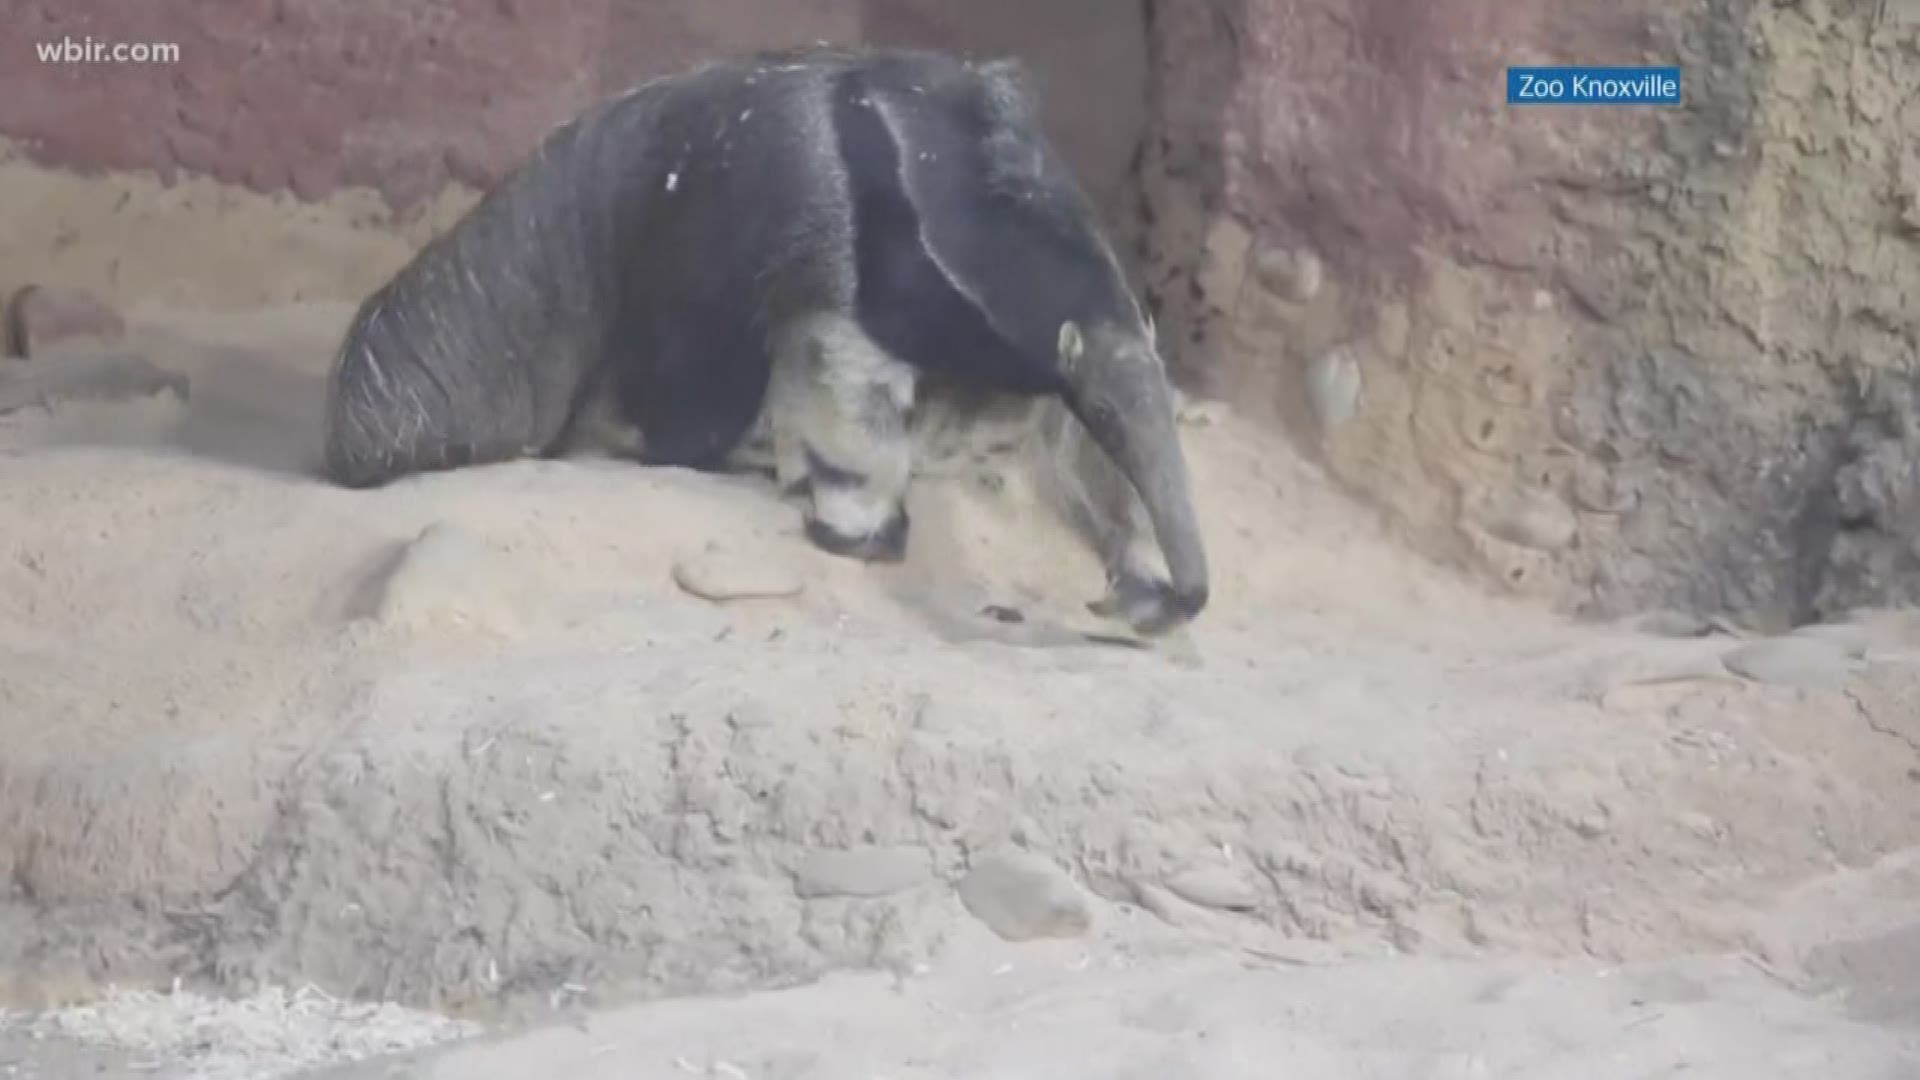 Annual passholder & circle of friends preview party for Tiana the giant anteater is Feb. 29 & March 1, zooknoxville.org. Feb. 24, 2020-4pm.